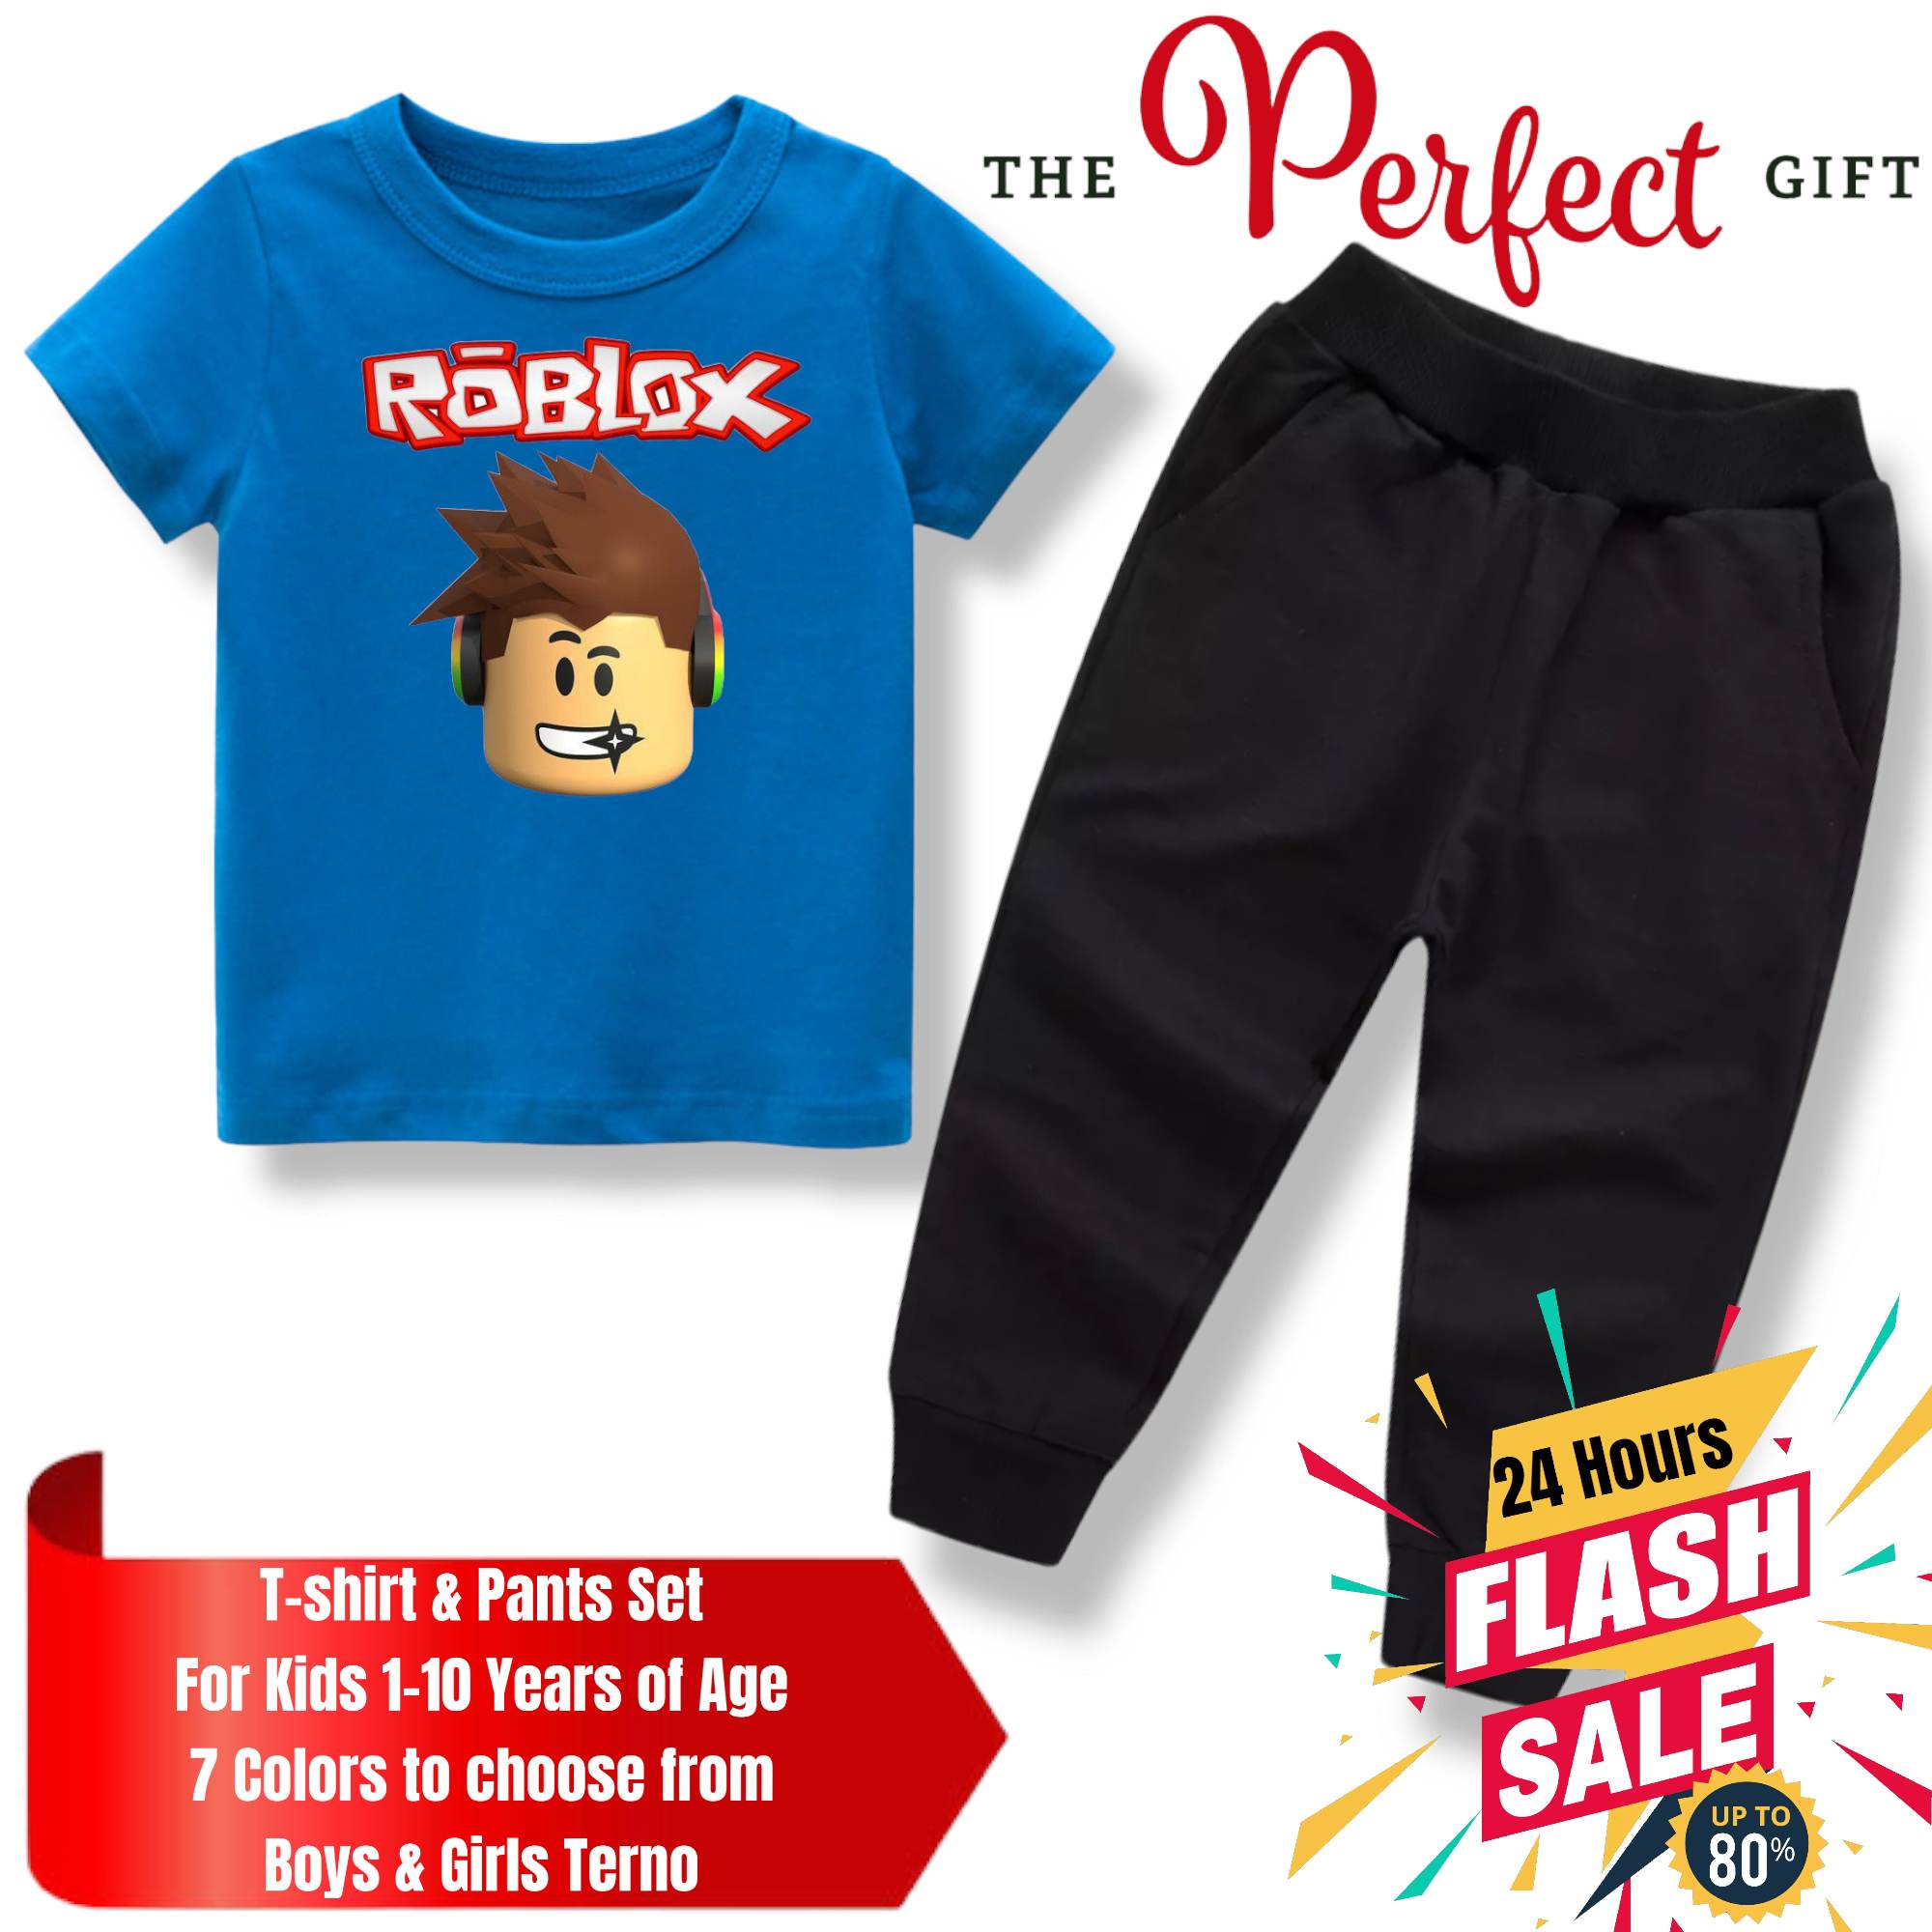 The New Roblox Casual Suit Game Anime Surrounding Two-dimensional Boys and  Girls Children's T-shirts and Shorts The Best Gift